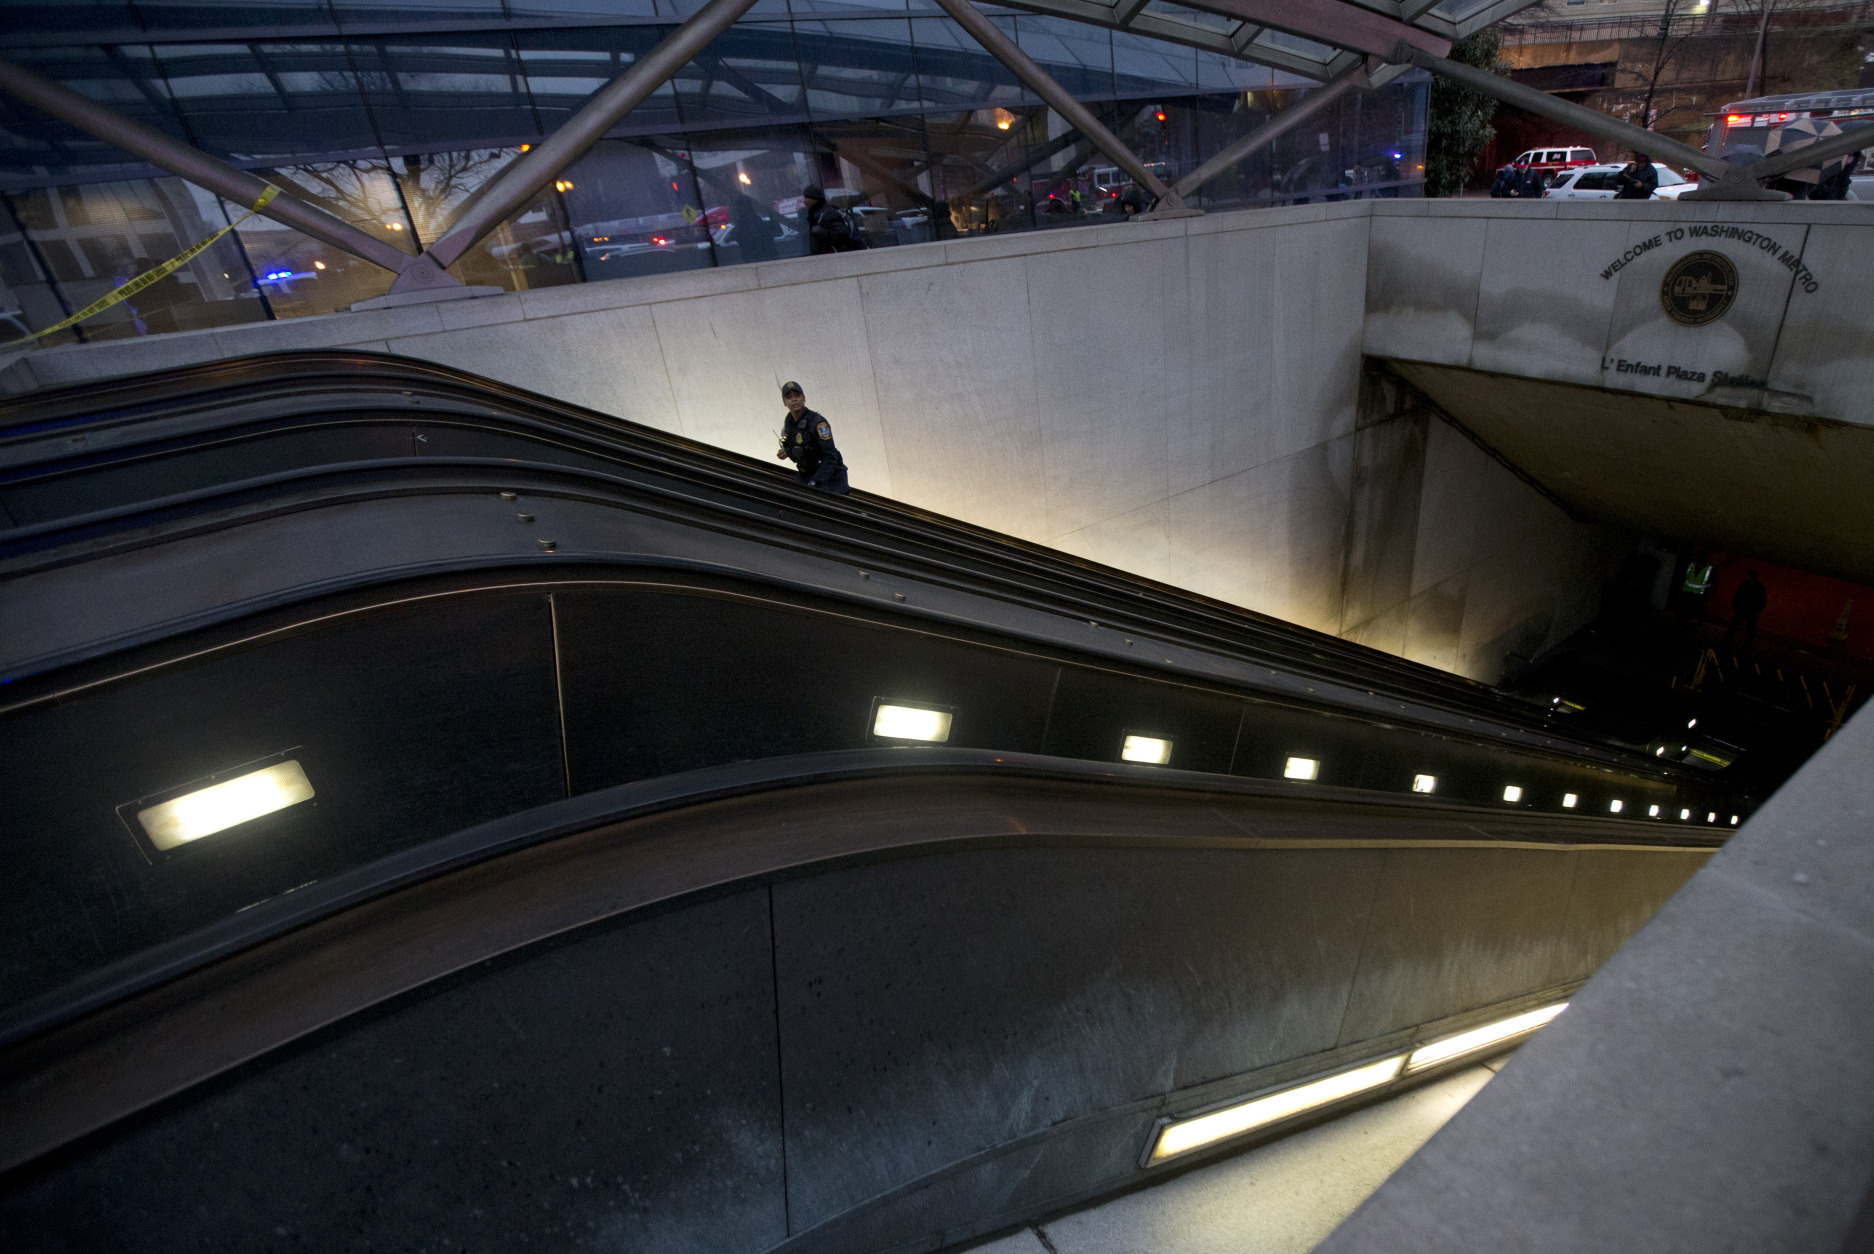 A Metro Transit Police officer walks up the escalator at LEnfant Plaza Station in Washington, Monday, Jan. 12, 2015, following an evacuation. Metro officials say one of the busiest stations in downtown Washington has been evacuated because of smoke.  Authorities say the source of the smoke is unknown.   (AP Photo/Manuel Balce Ceneta)